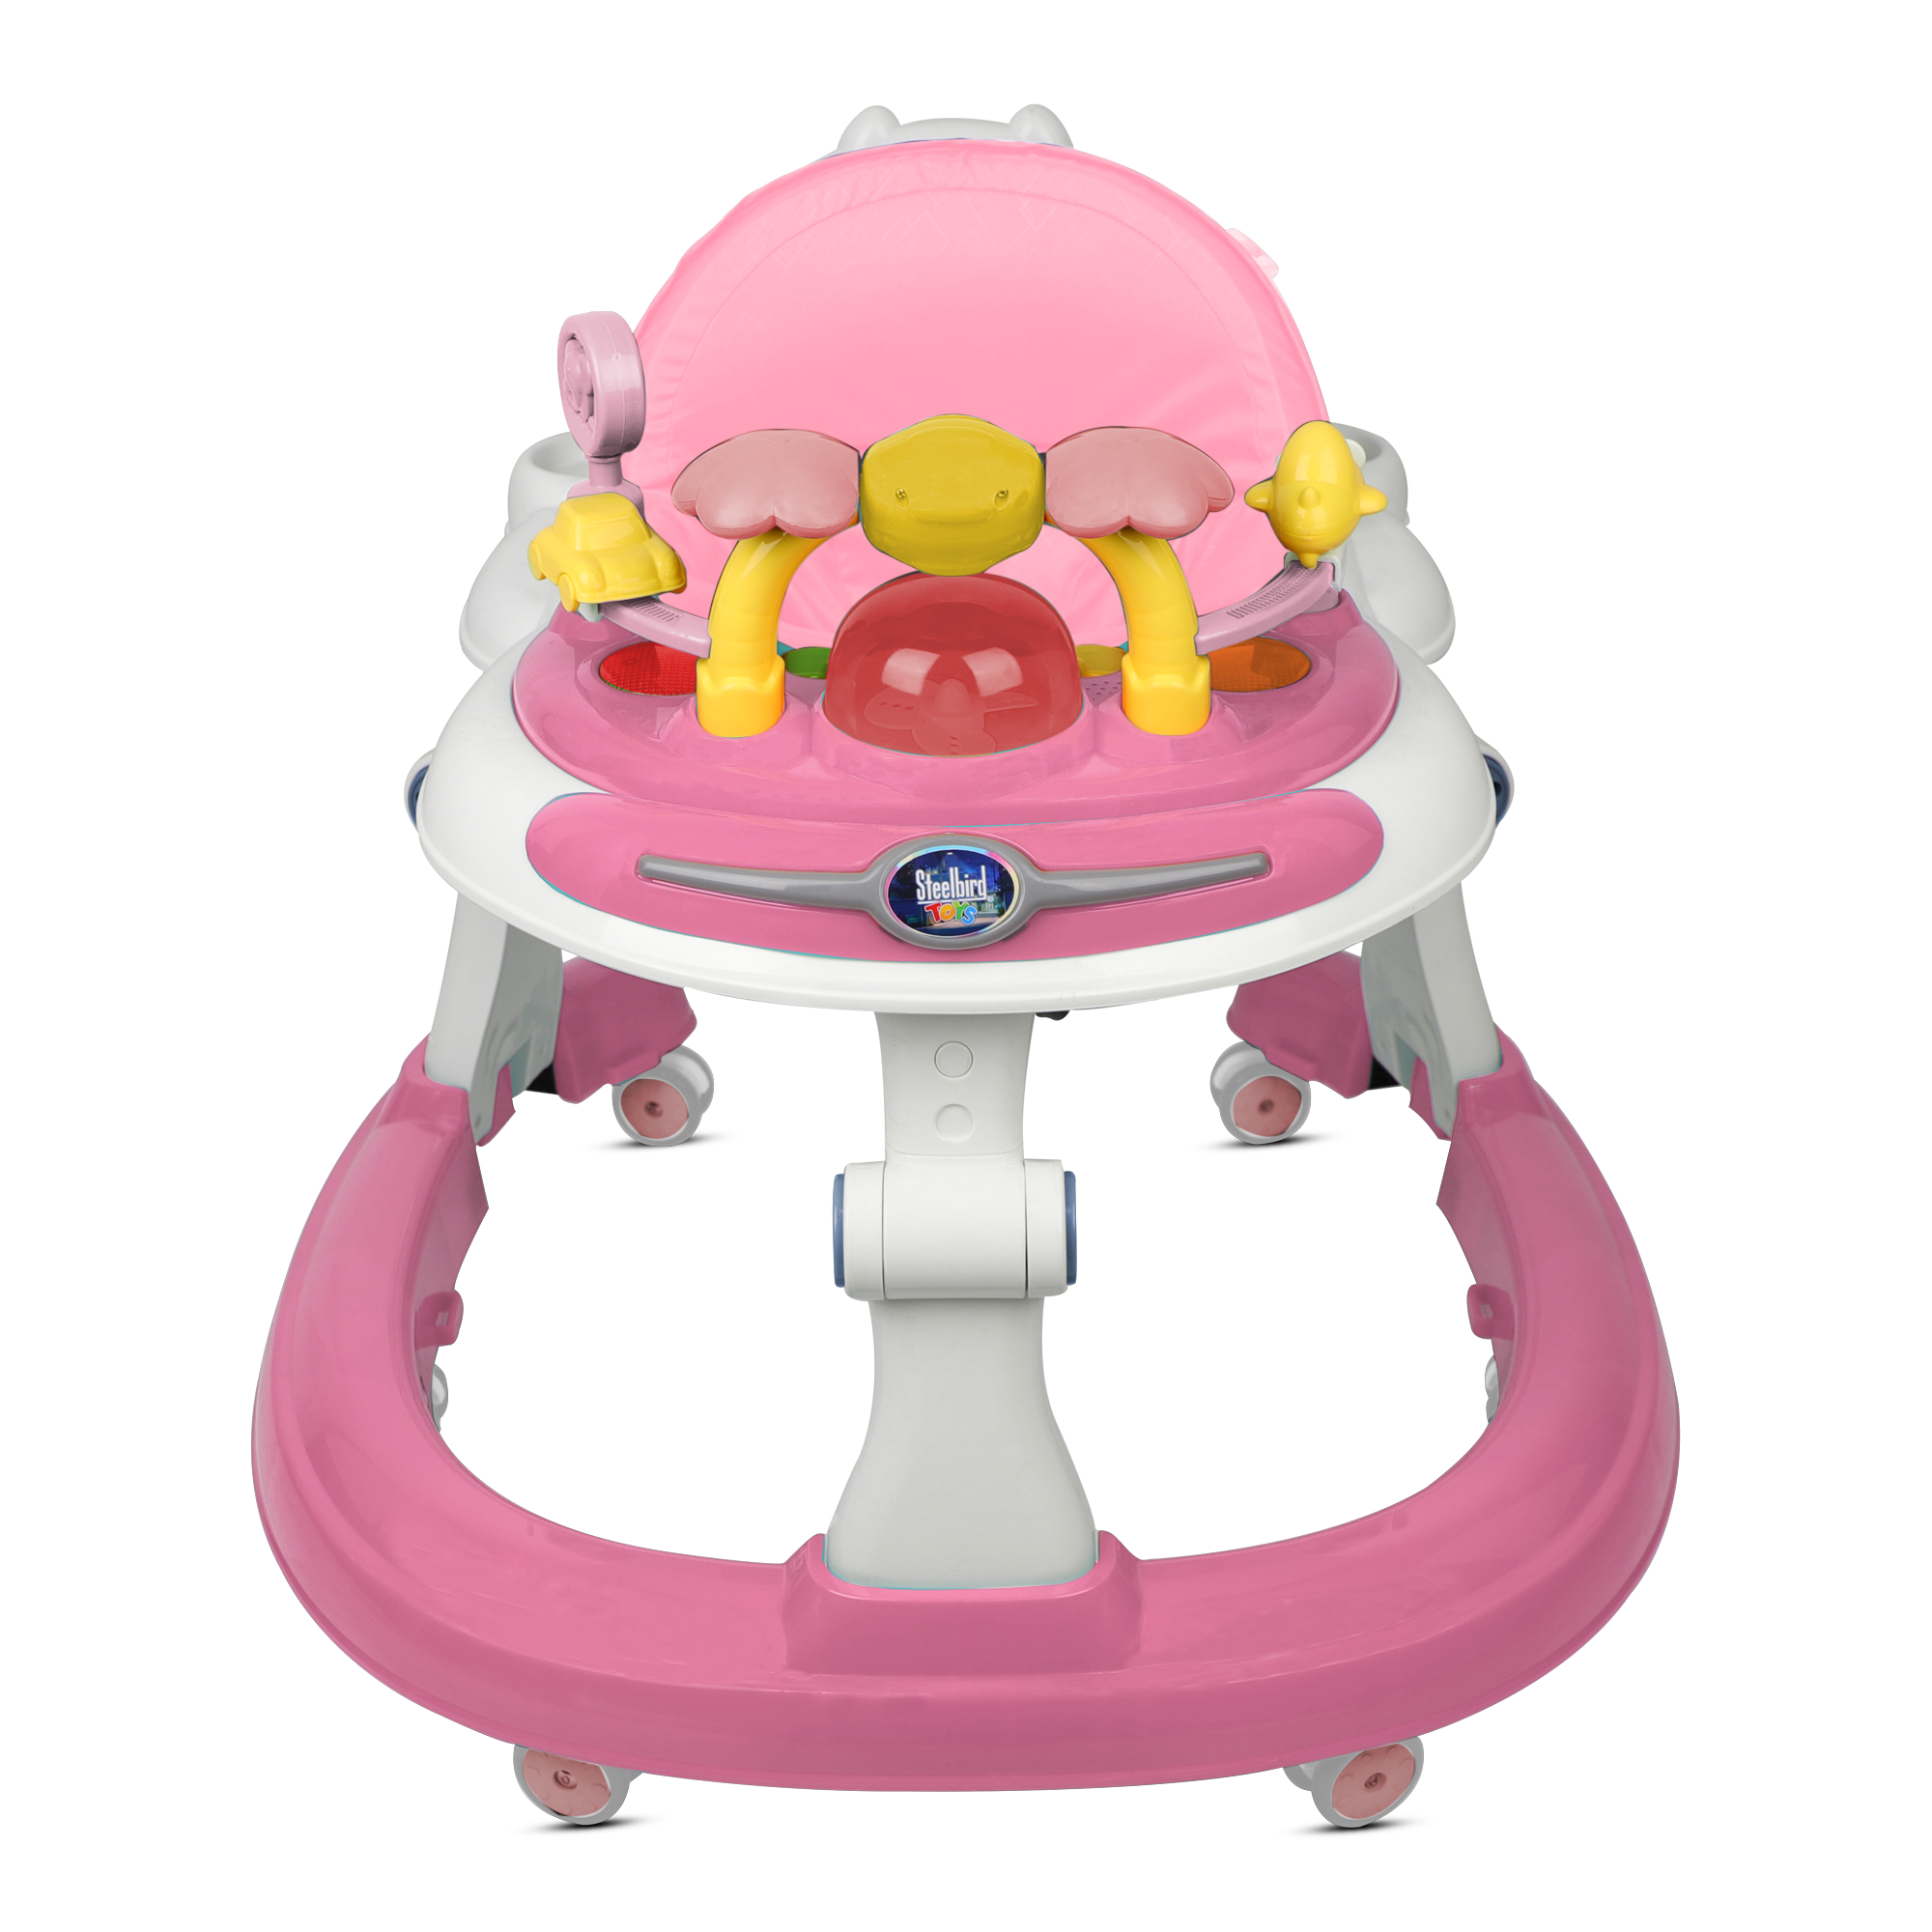 PINK BABY WALKER WITH PUSH HANDLE